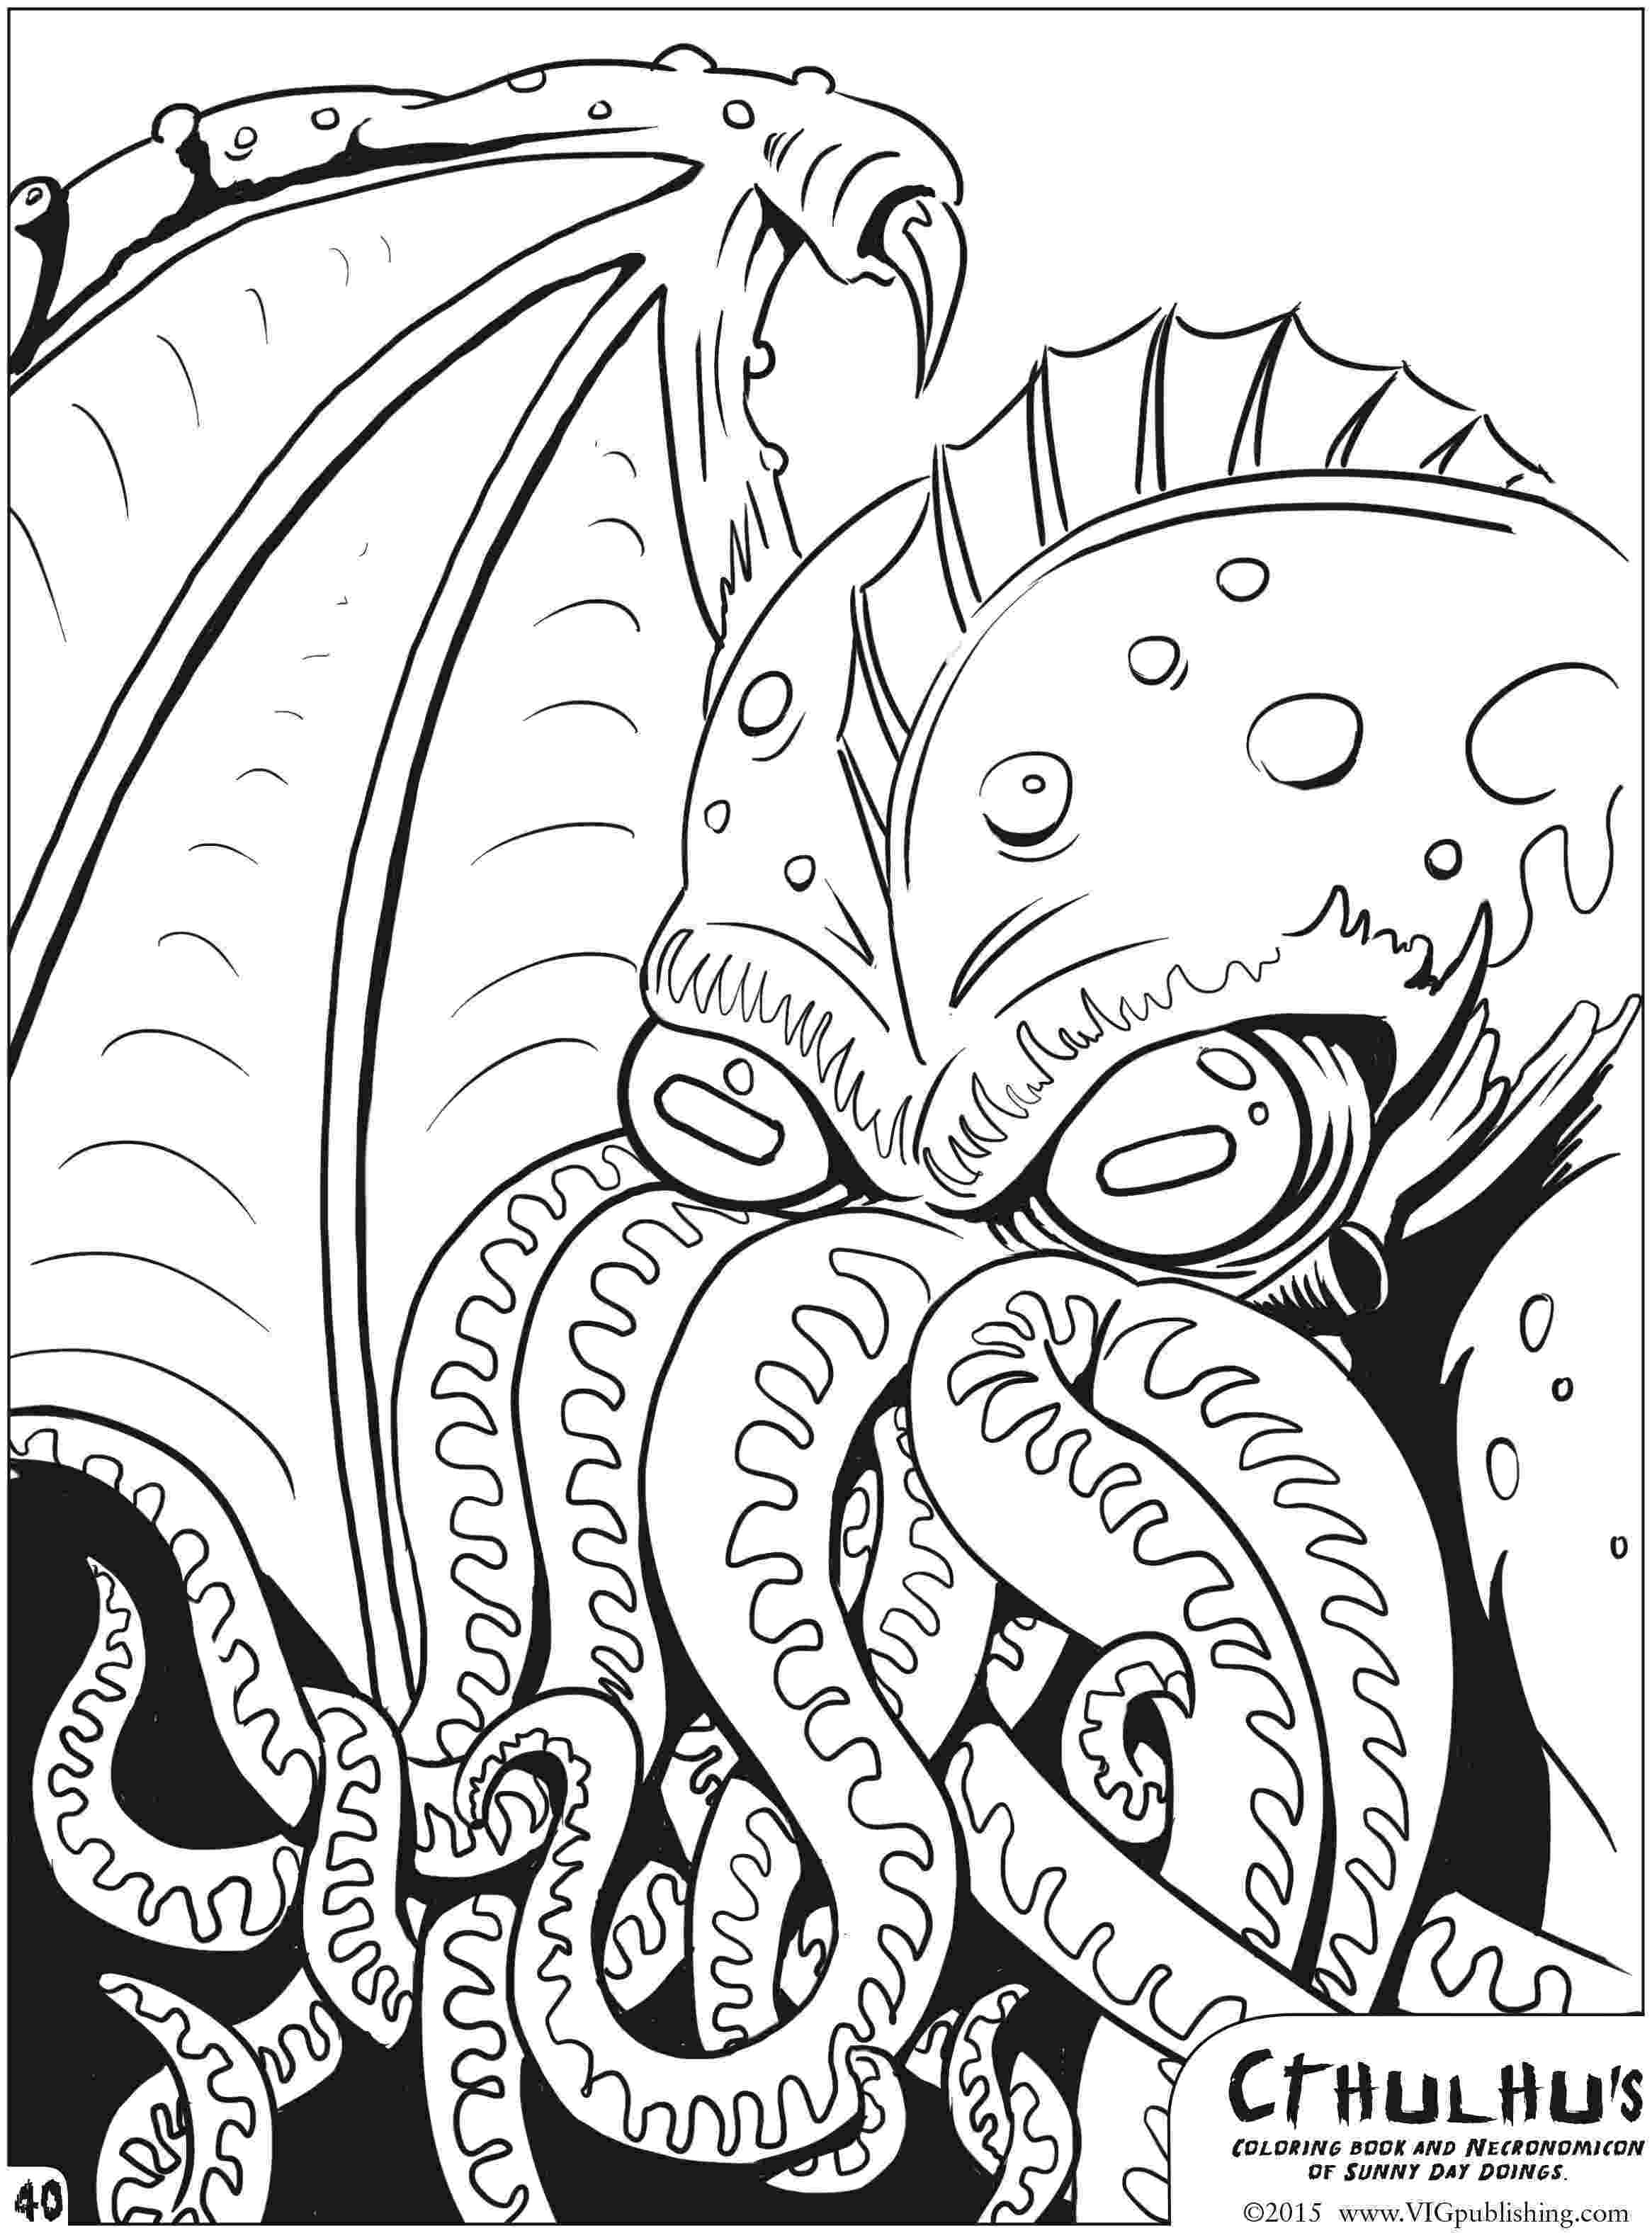 is for cthulhu coloring book cthulhu coloring pages xyzcoloring is coloring for book cthulhu 